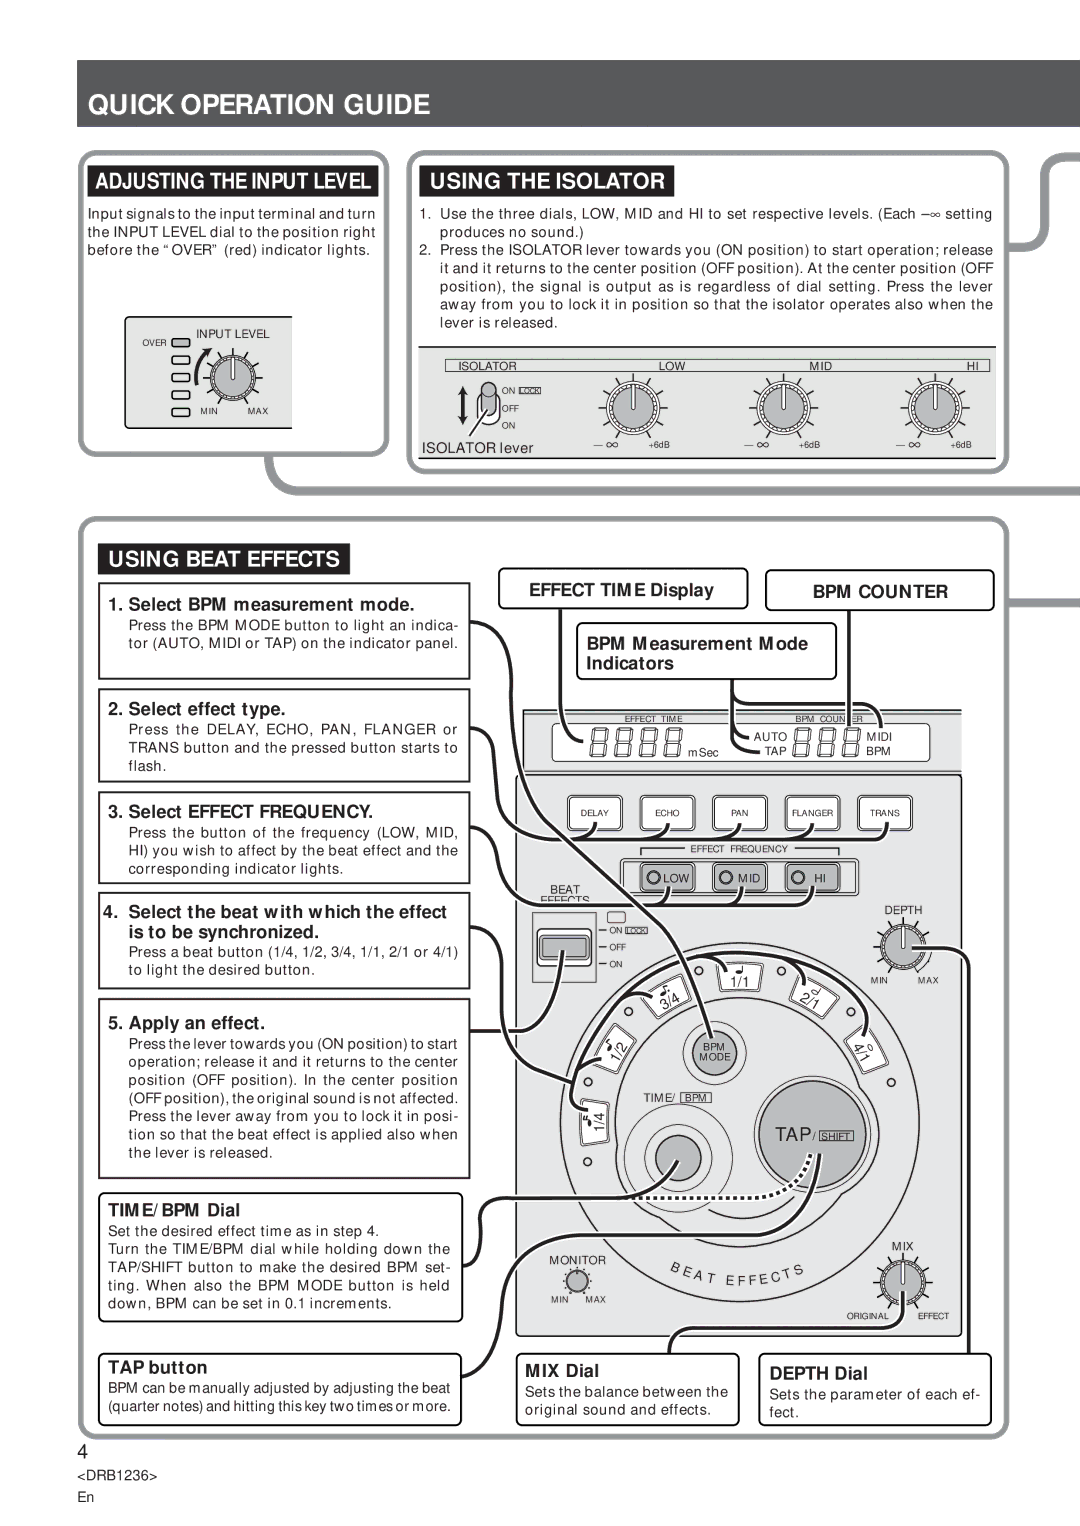 Pioneer Efx-500 Quick Operation Guide, Using the Isolator, Using Beat Effects, Adjusting the Input Level, BPM Counter 